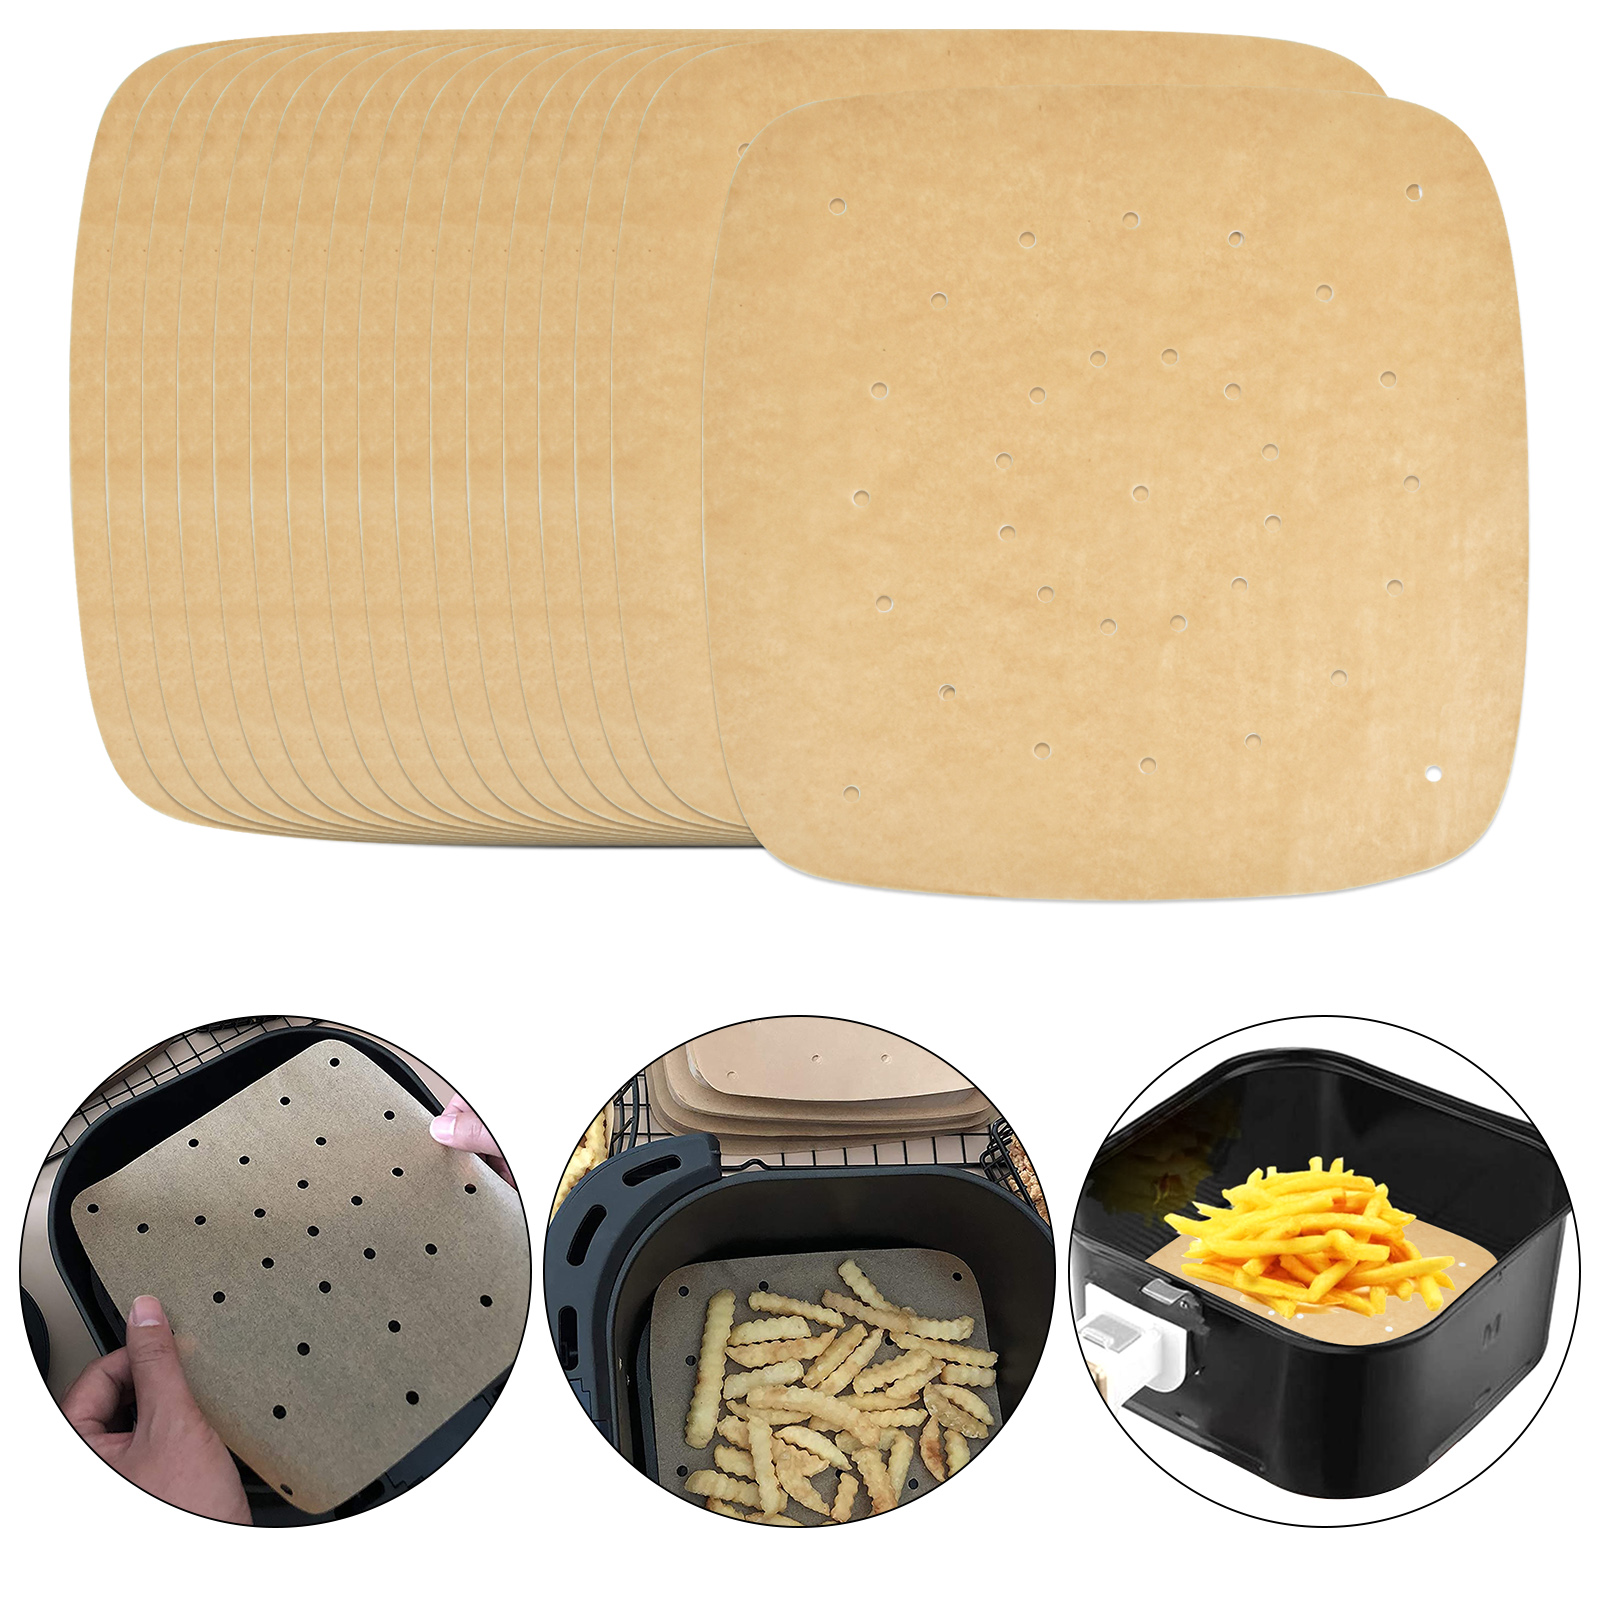 Air Fryer Parchment Paper Liners, 100Pcs Square Air Fryer Liners, 8.5 Inch  Perforated Parchment Paper Sheets for Baking, Parchment Paper for Air Fryer  and Bamboo Steaming Basket 